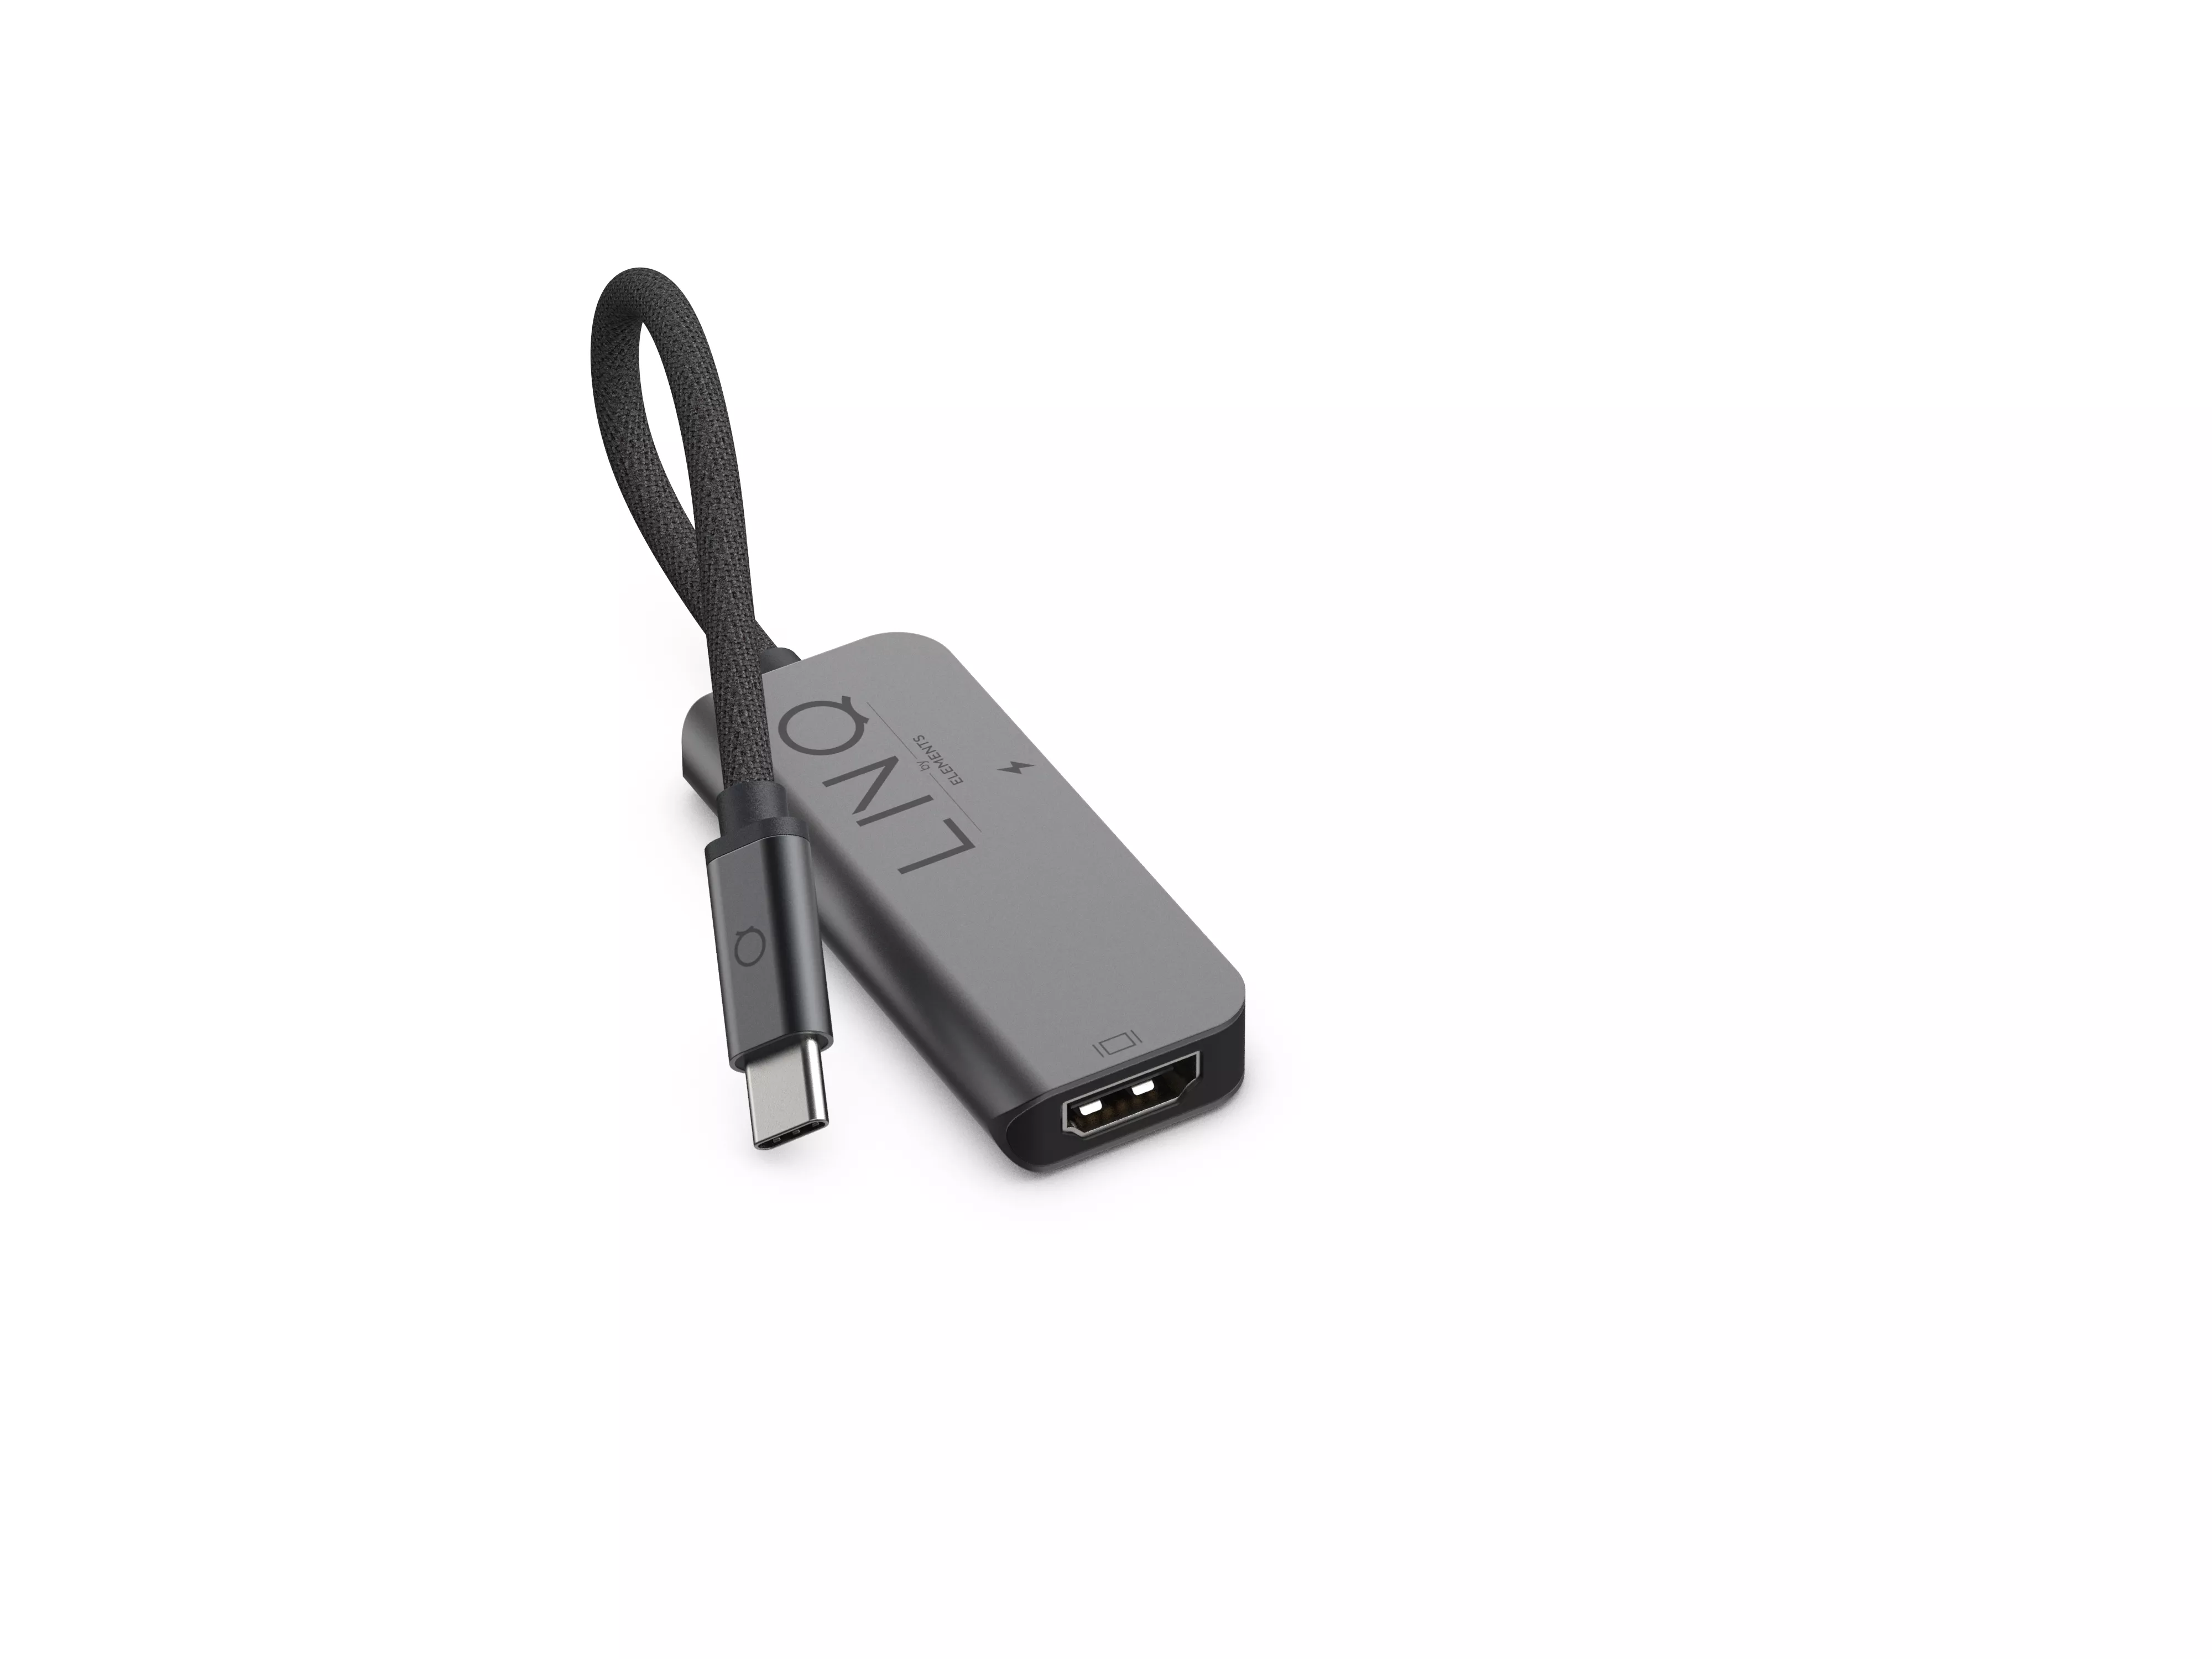 Achat LINQ byELEMENTS 4K HDMI Adapter with PD sur hello RSE - visuel 3